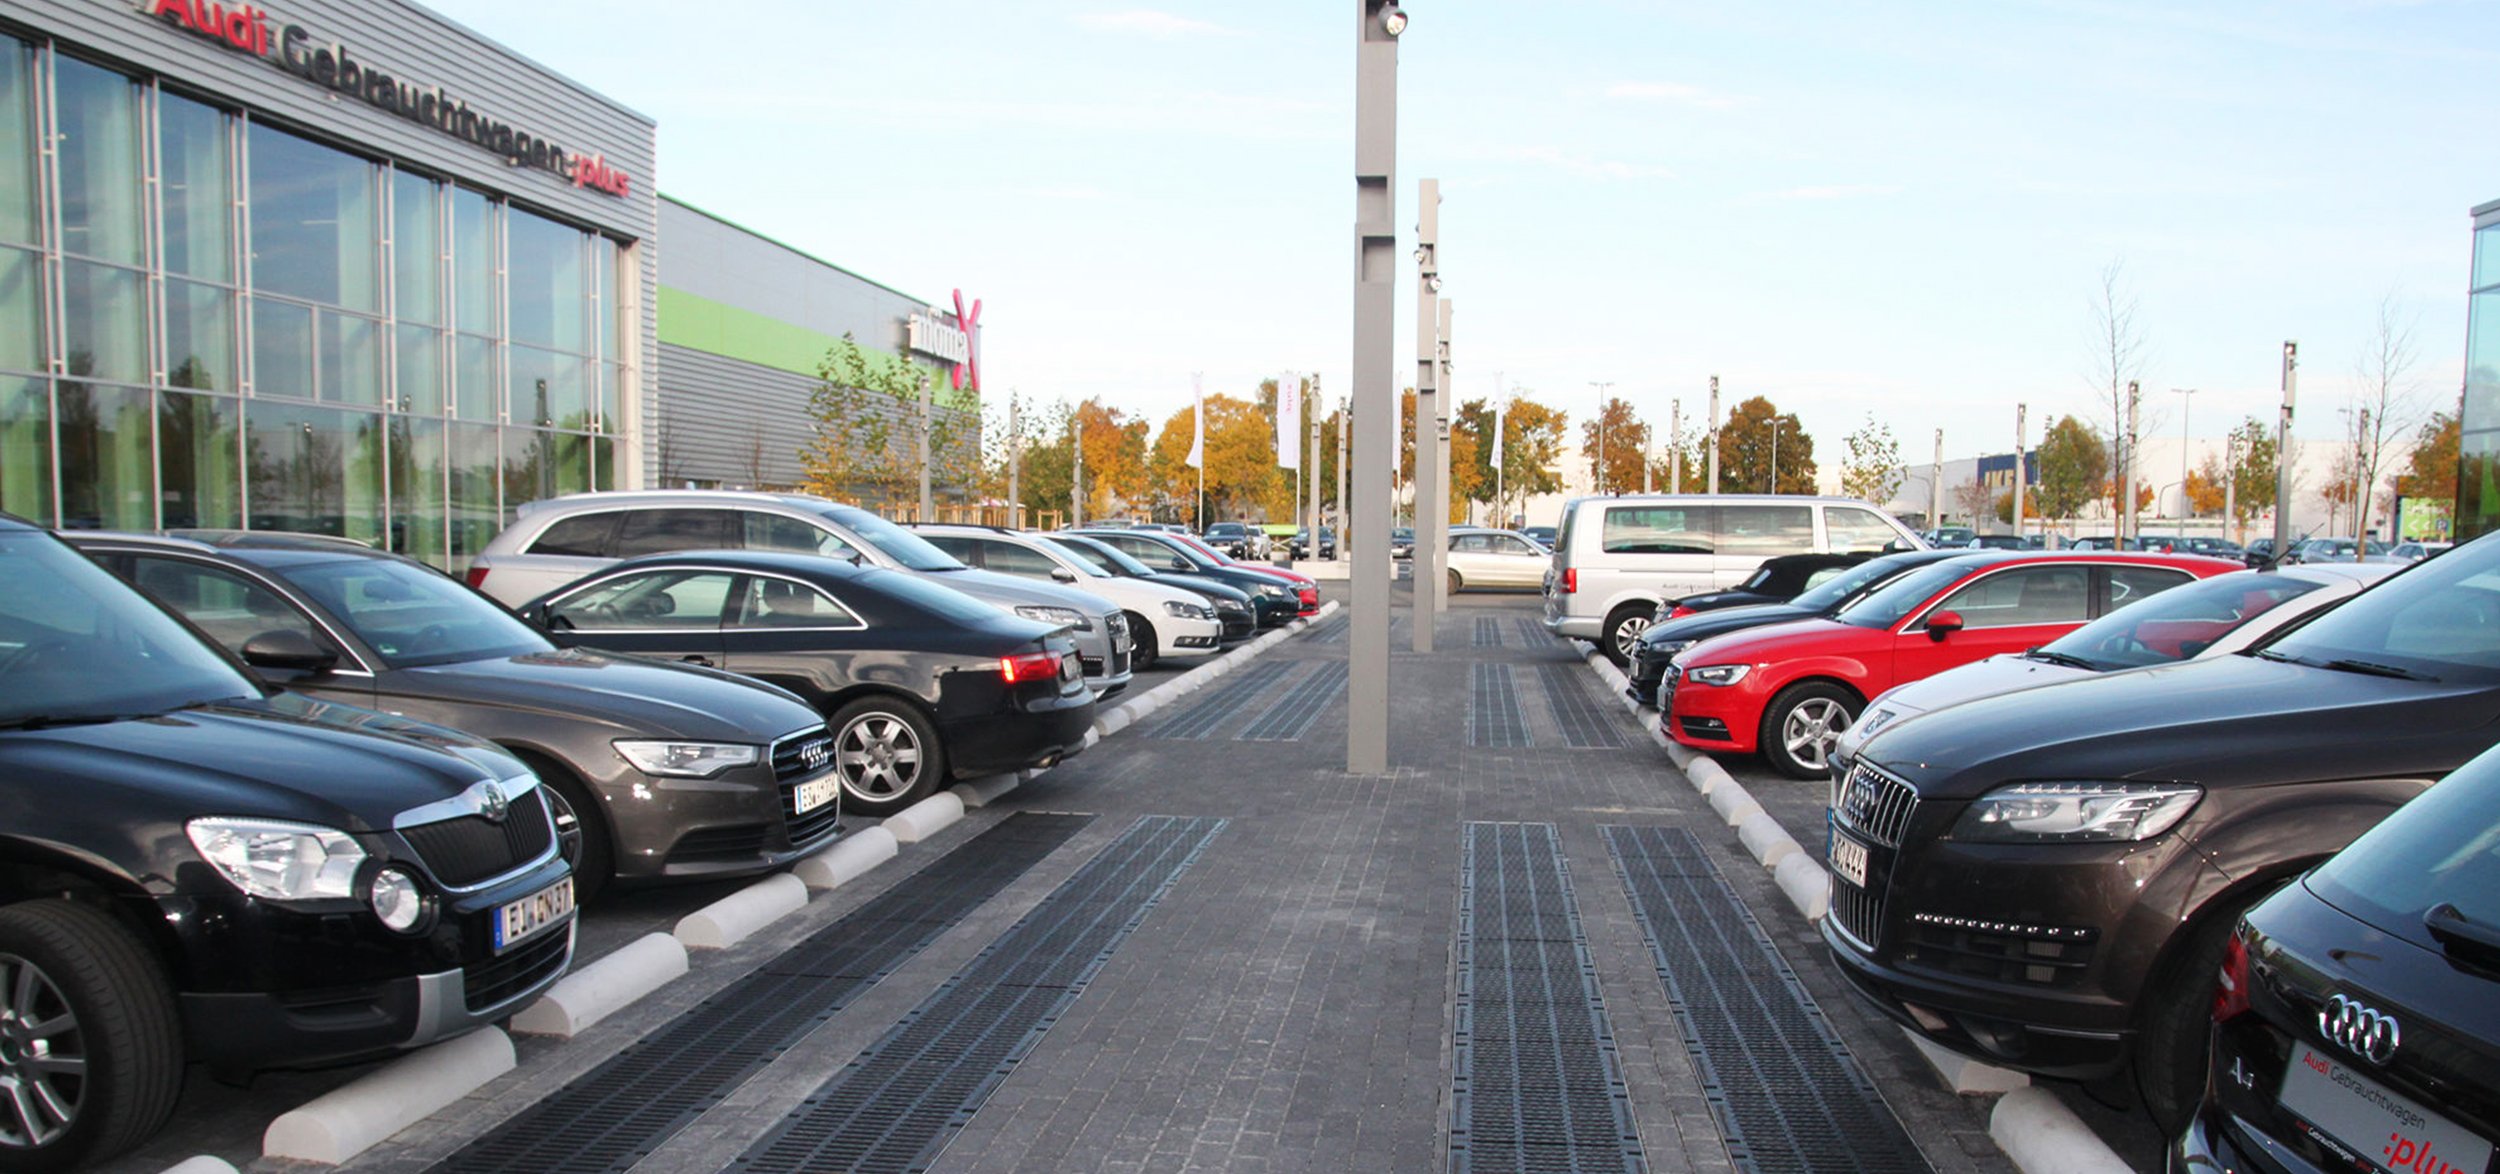 Car park drainage at Audi in Germany with DRAINFIX CLEAN